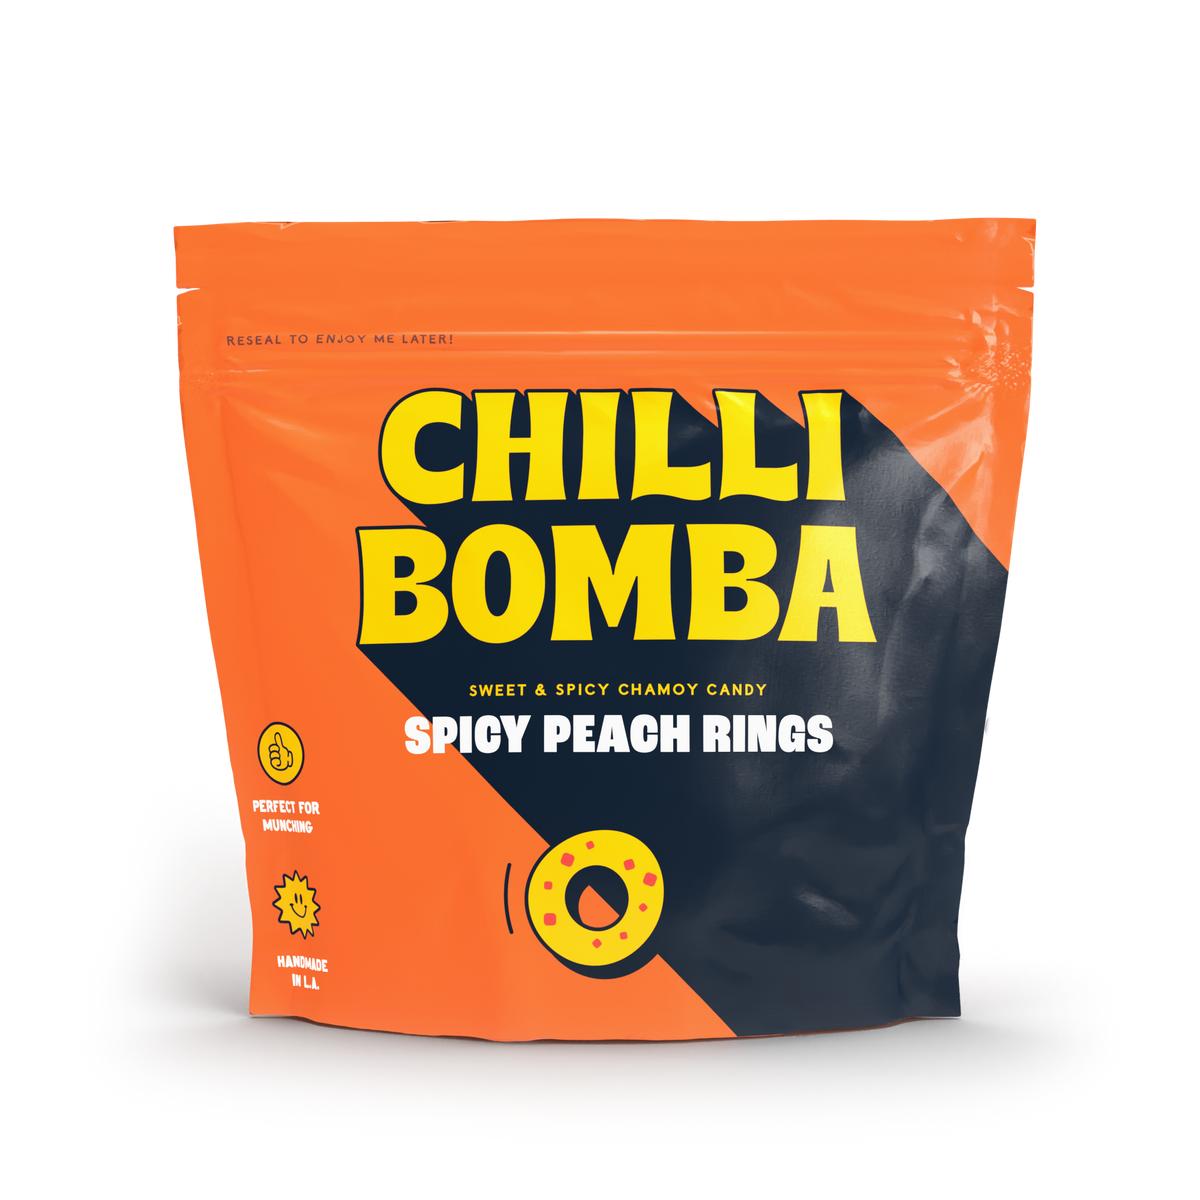 Chilli Bomba Spicy Peach Rings Chamoy Candy - 8oz